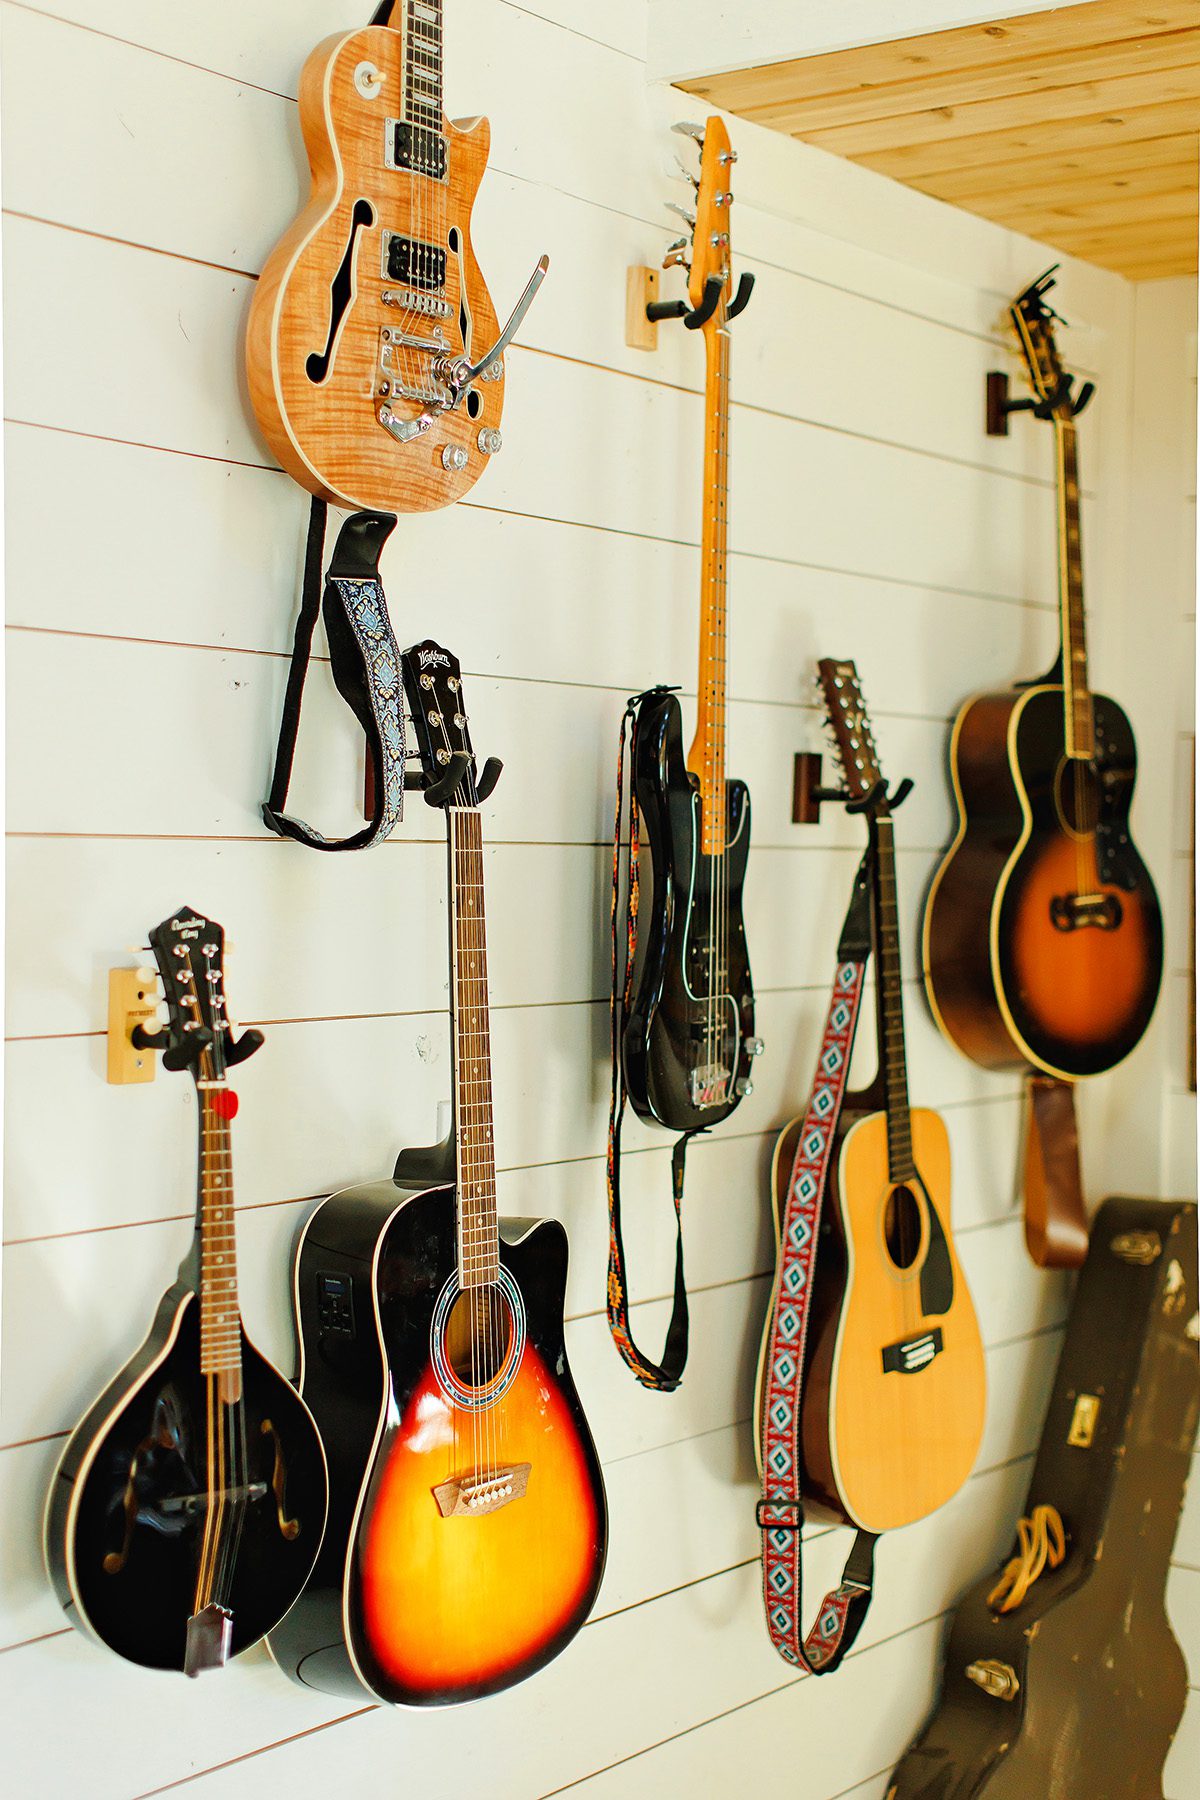 Guitars hanging in Dripping Springs, Texas